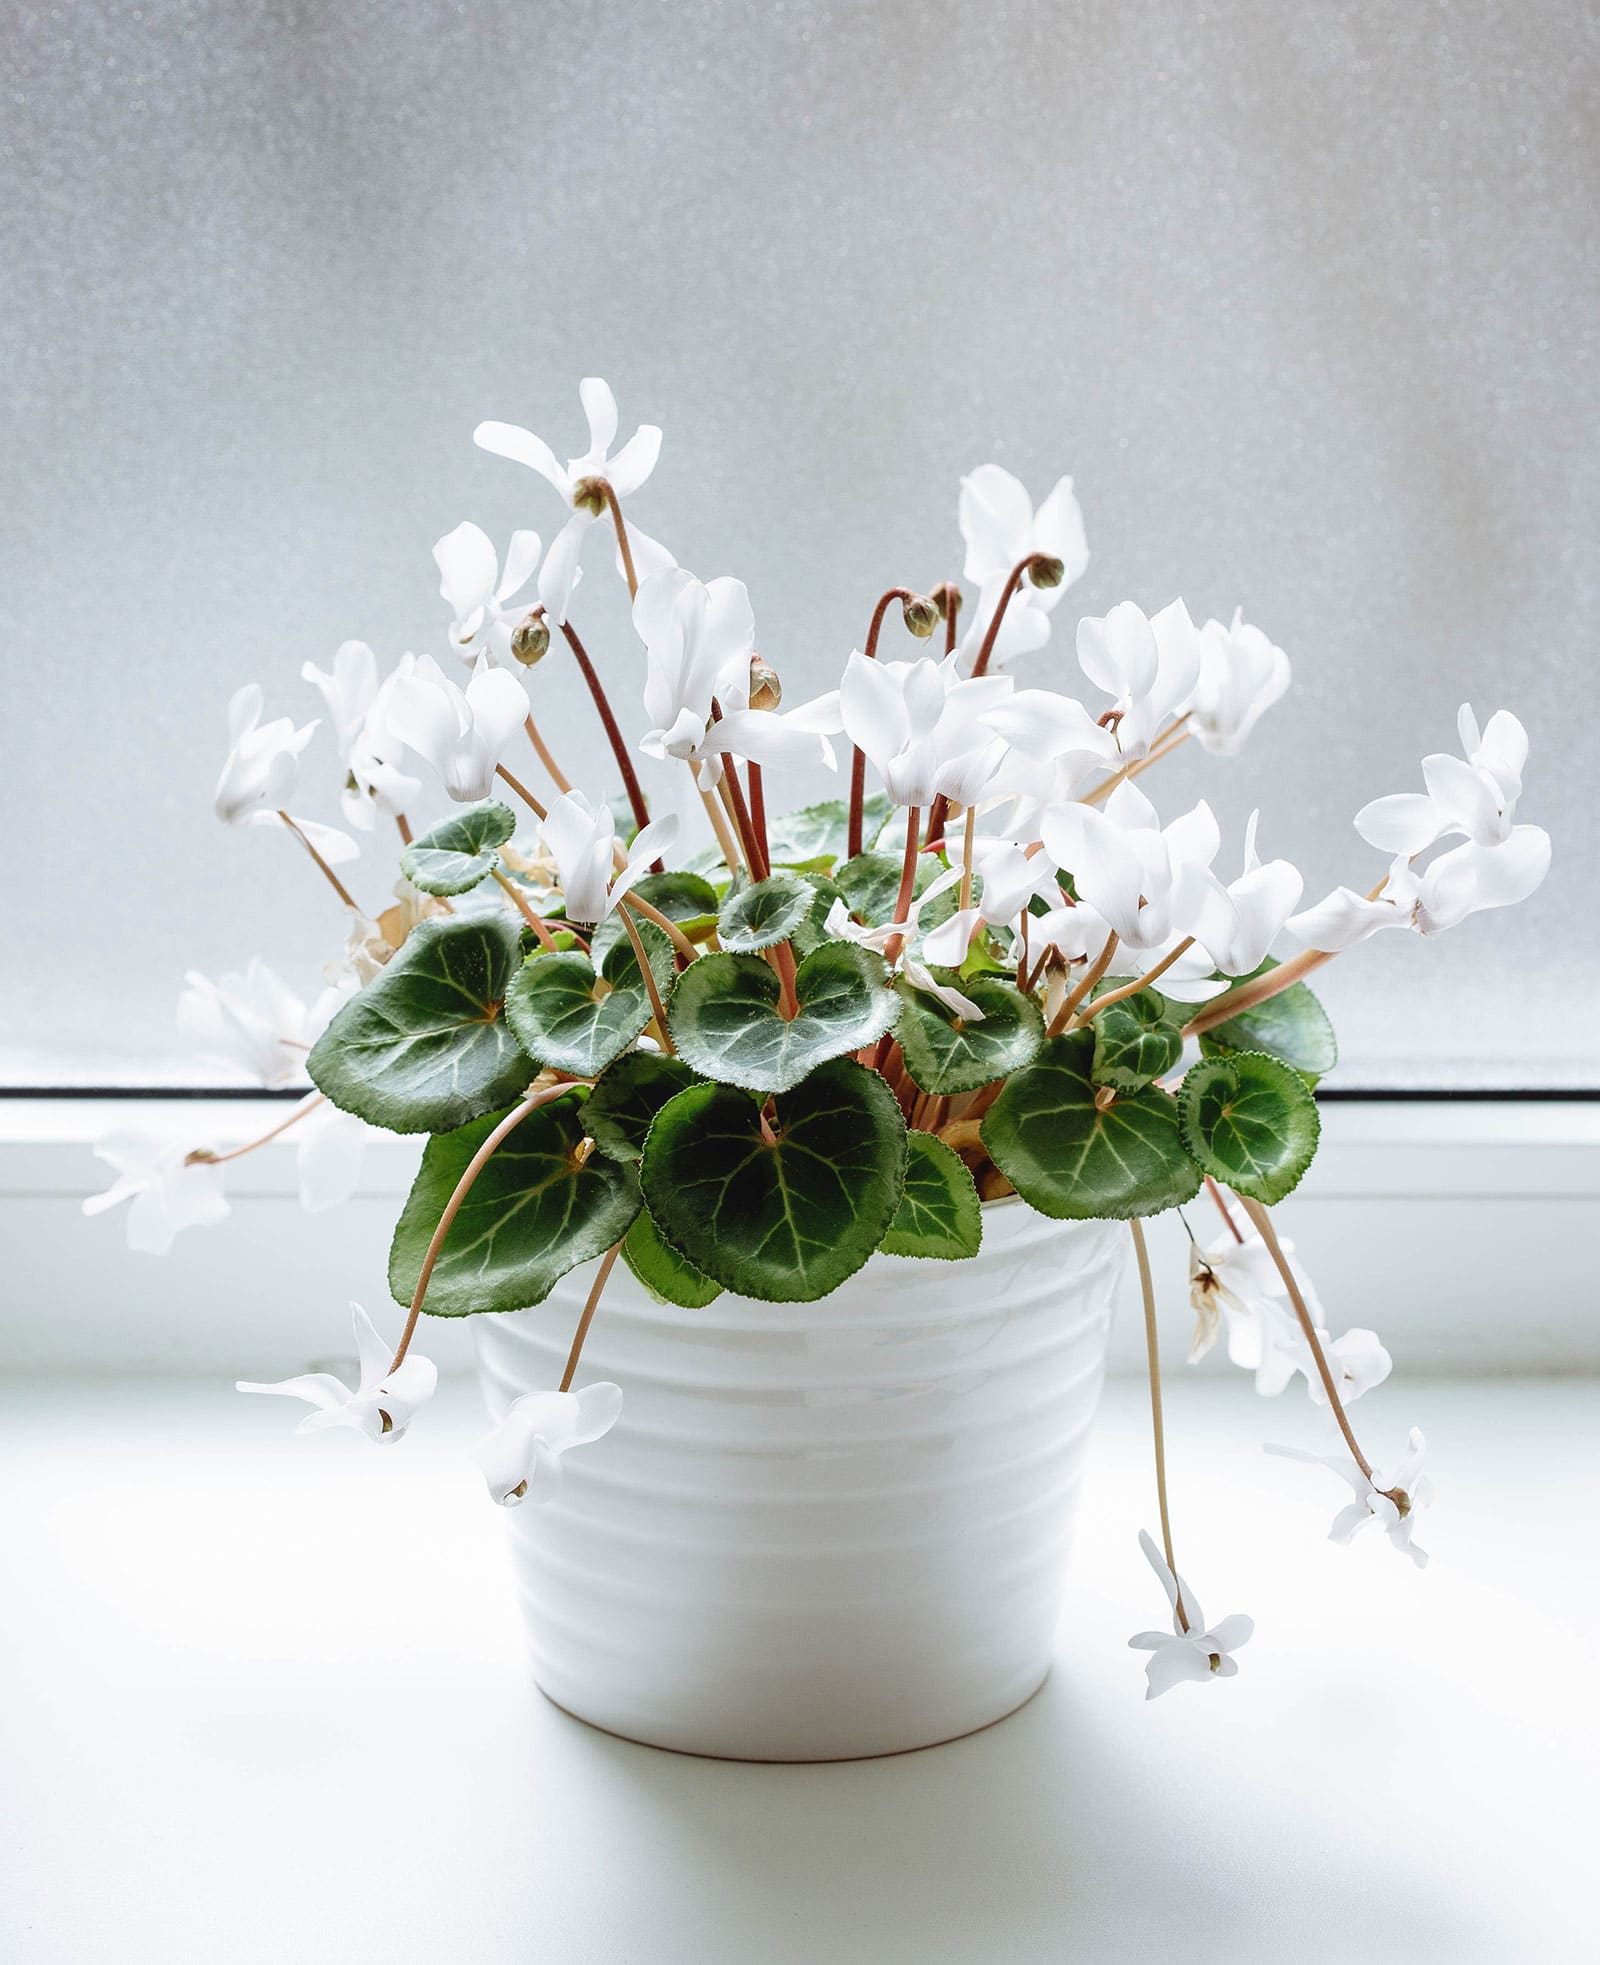 Cyclamen care: everything you need to know about growing cyclamen indoors